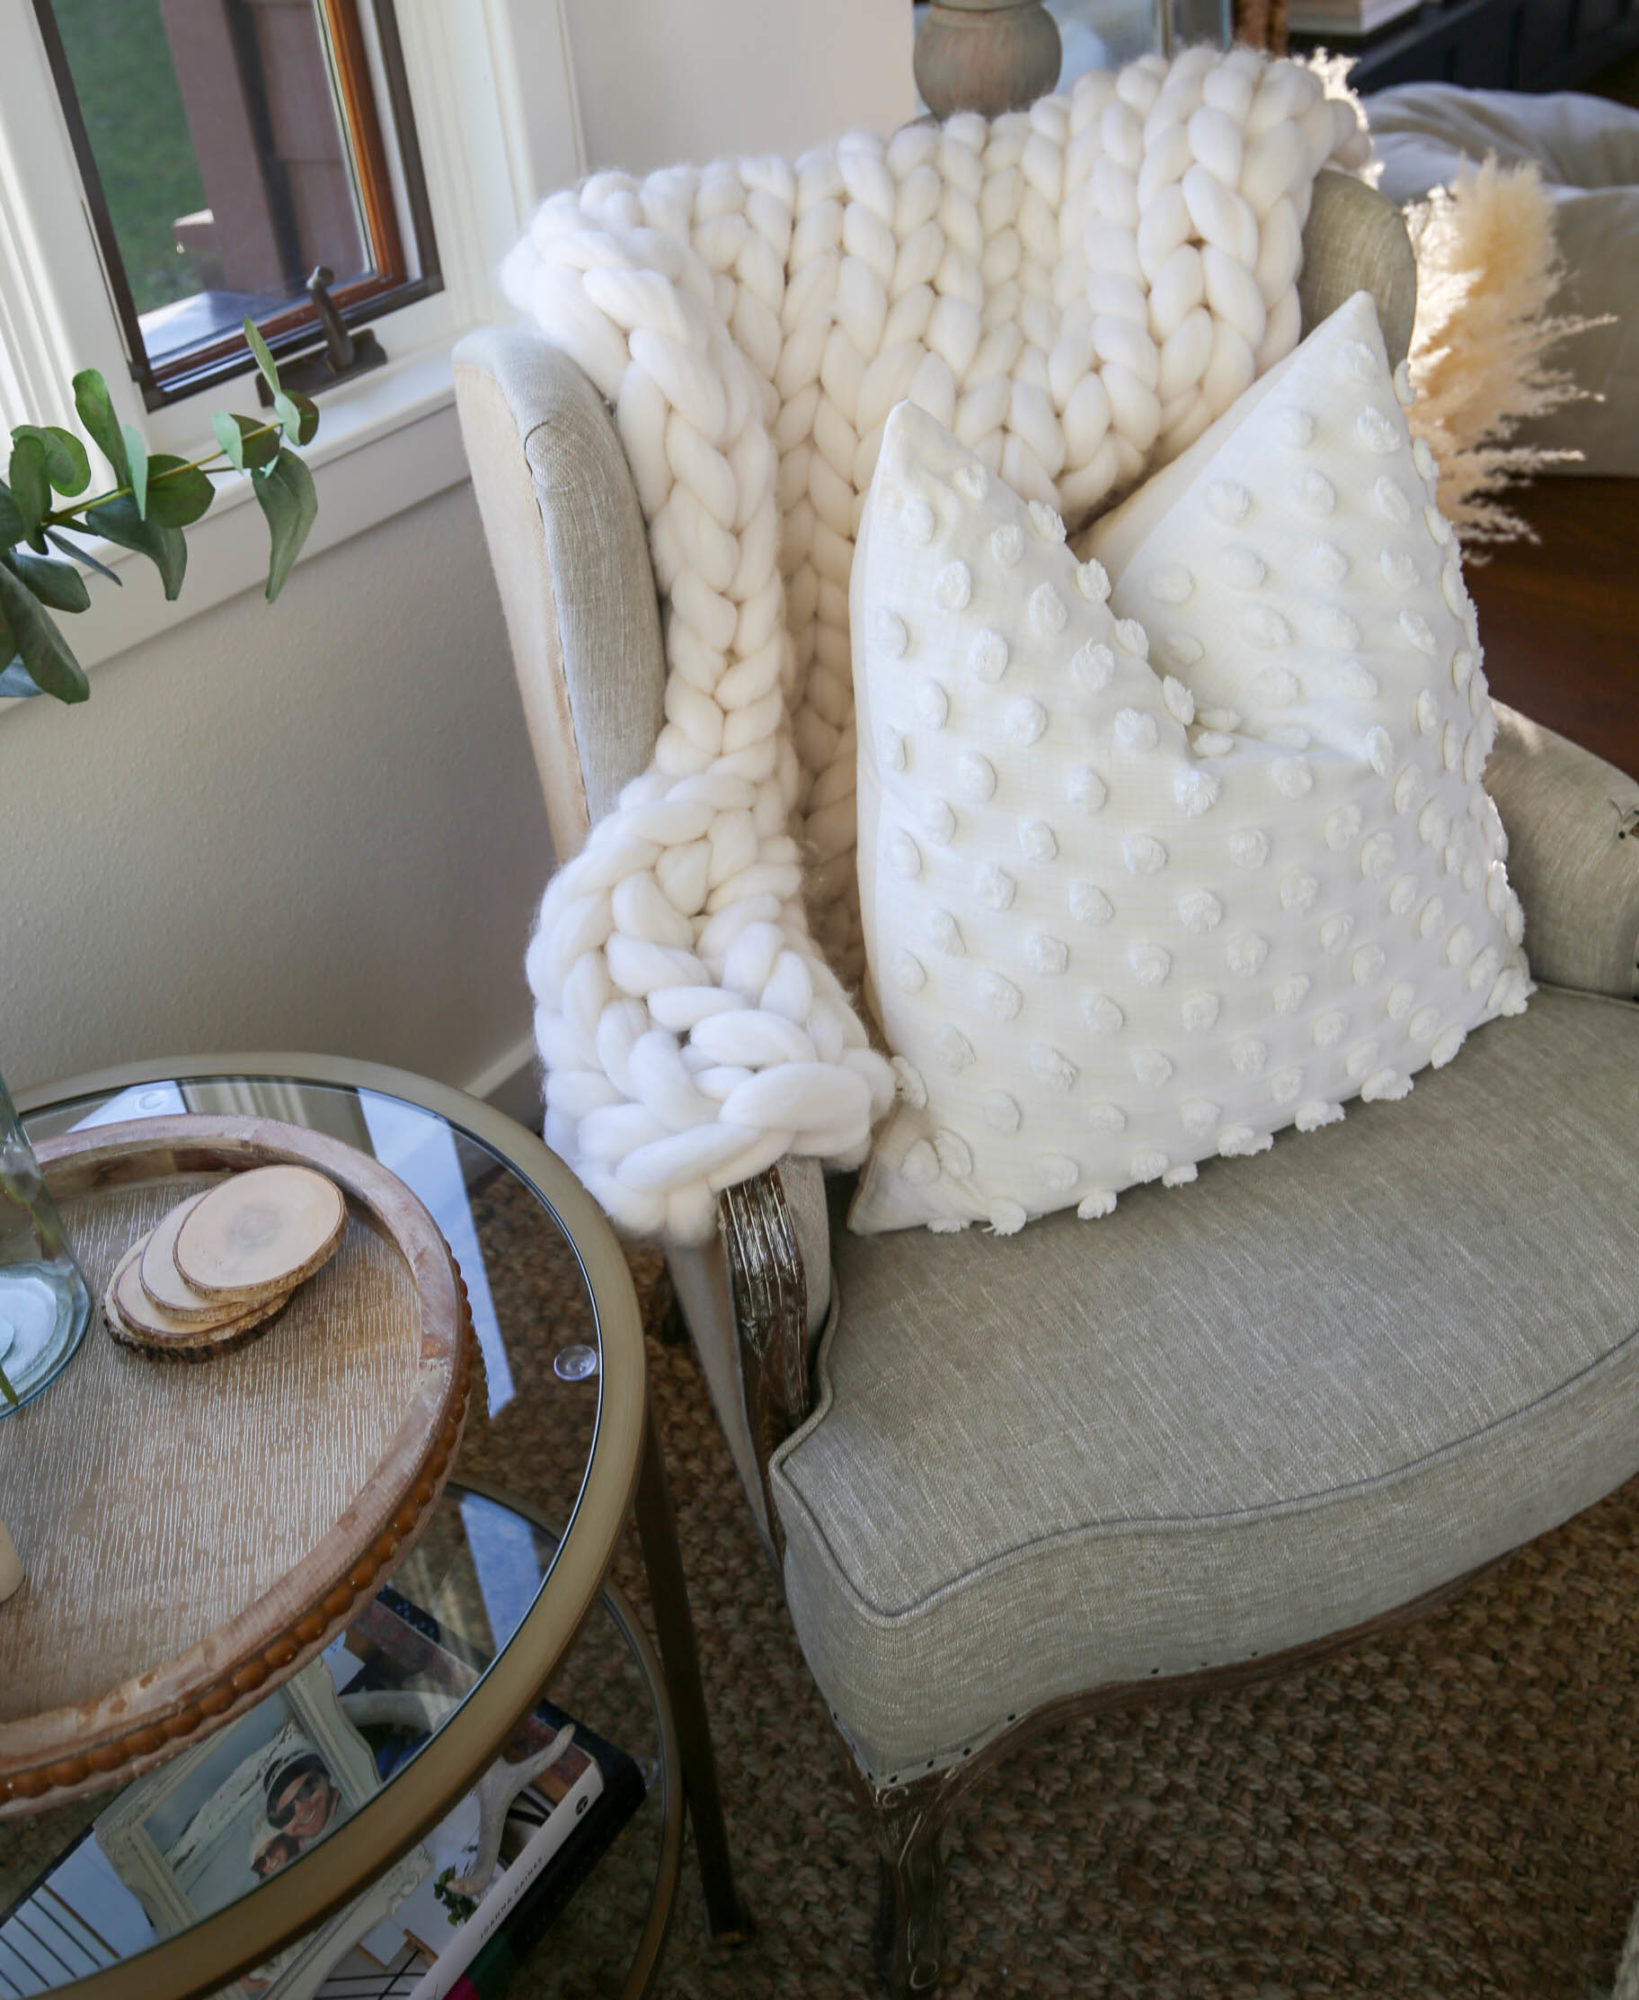 how to style a cozy corner